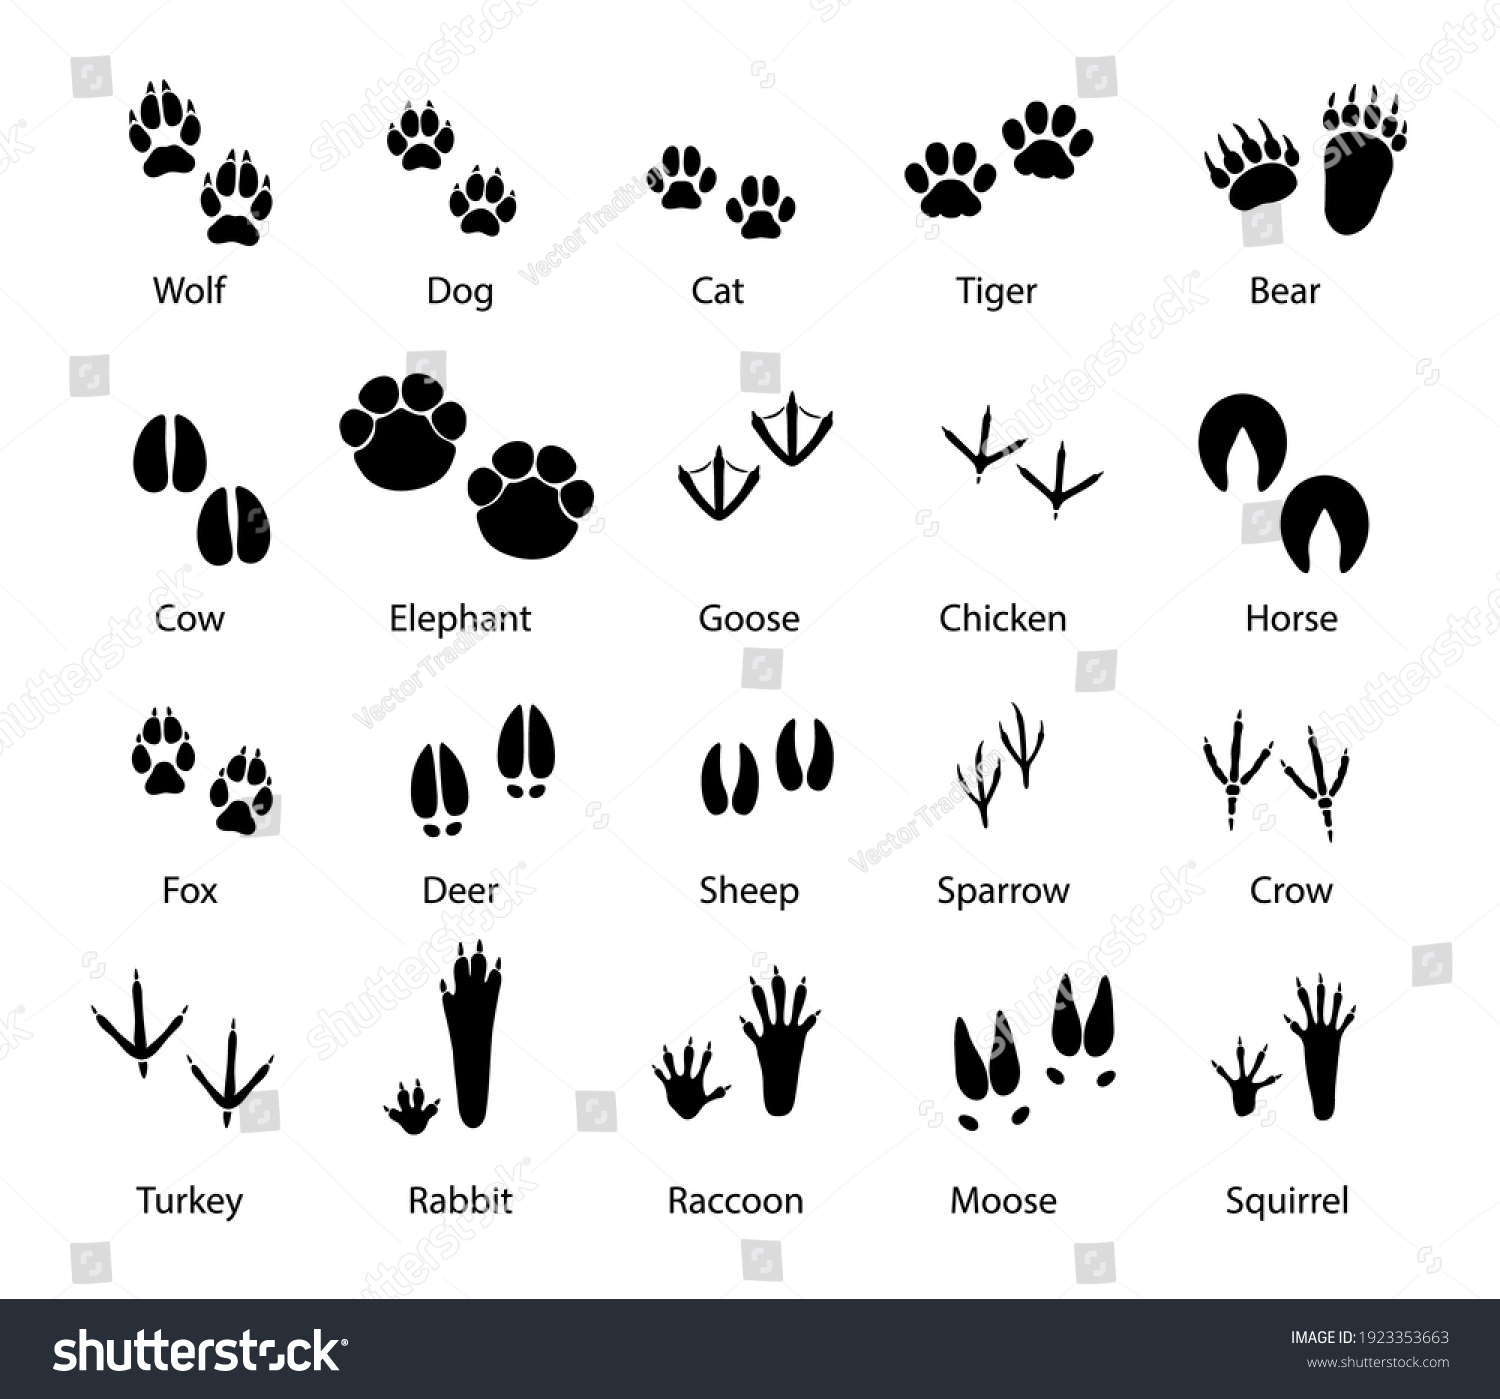 SVG of Animals and birds feet tracks, vector trails of wolf, dog and cat, tiger and bear with cow and elephant. Goose, chicken, horse and fox, deer with sheep or sparrow and crow. Turkey, rabbit and raccoon svg